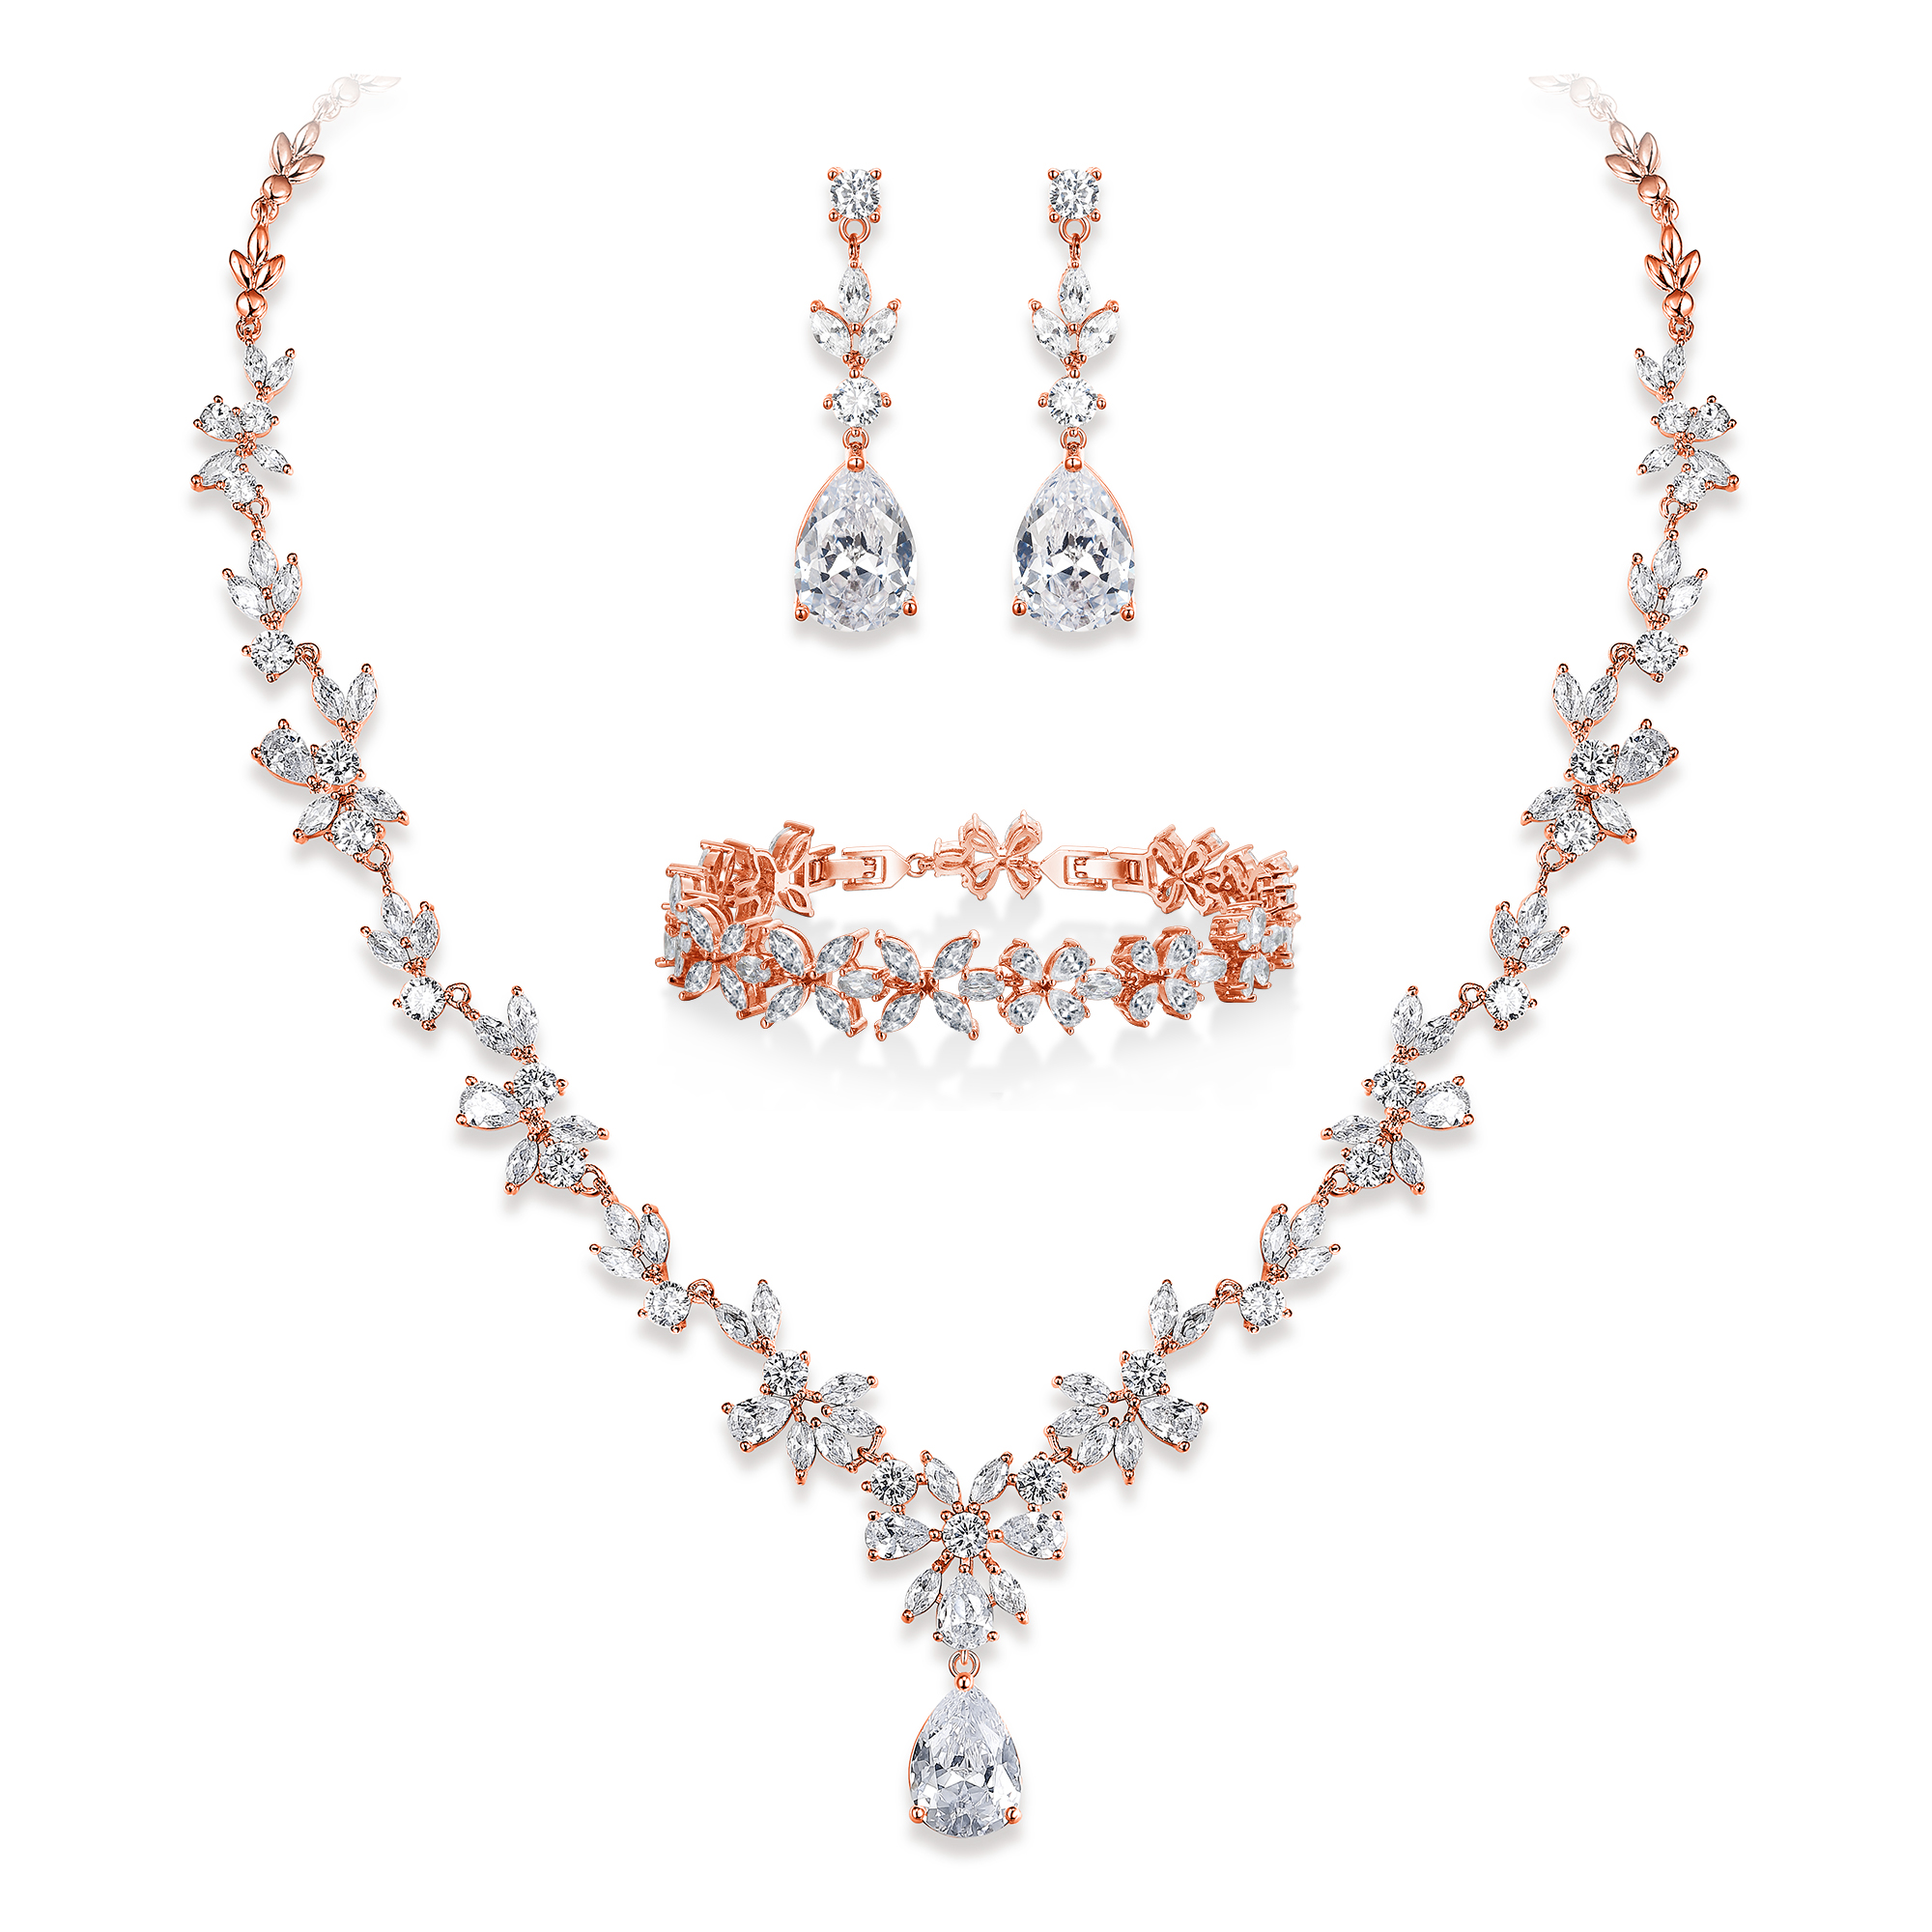 Wedure Bridal Jewelry Set for Bride Bridesmaid, Rose Gold Plated Flower Leaf White Cubic Zirconia Necklace Earrings Bracelet Set for Wedding Party - image 1 of 5